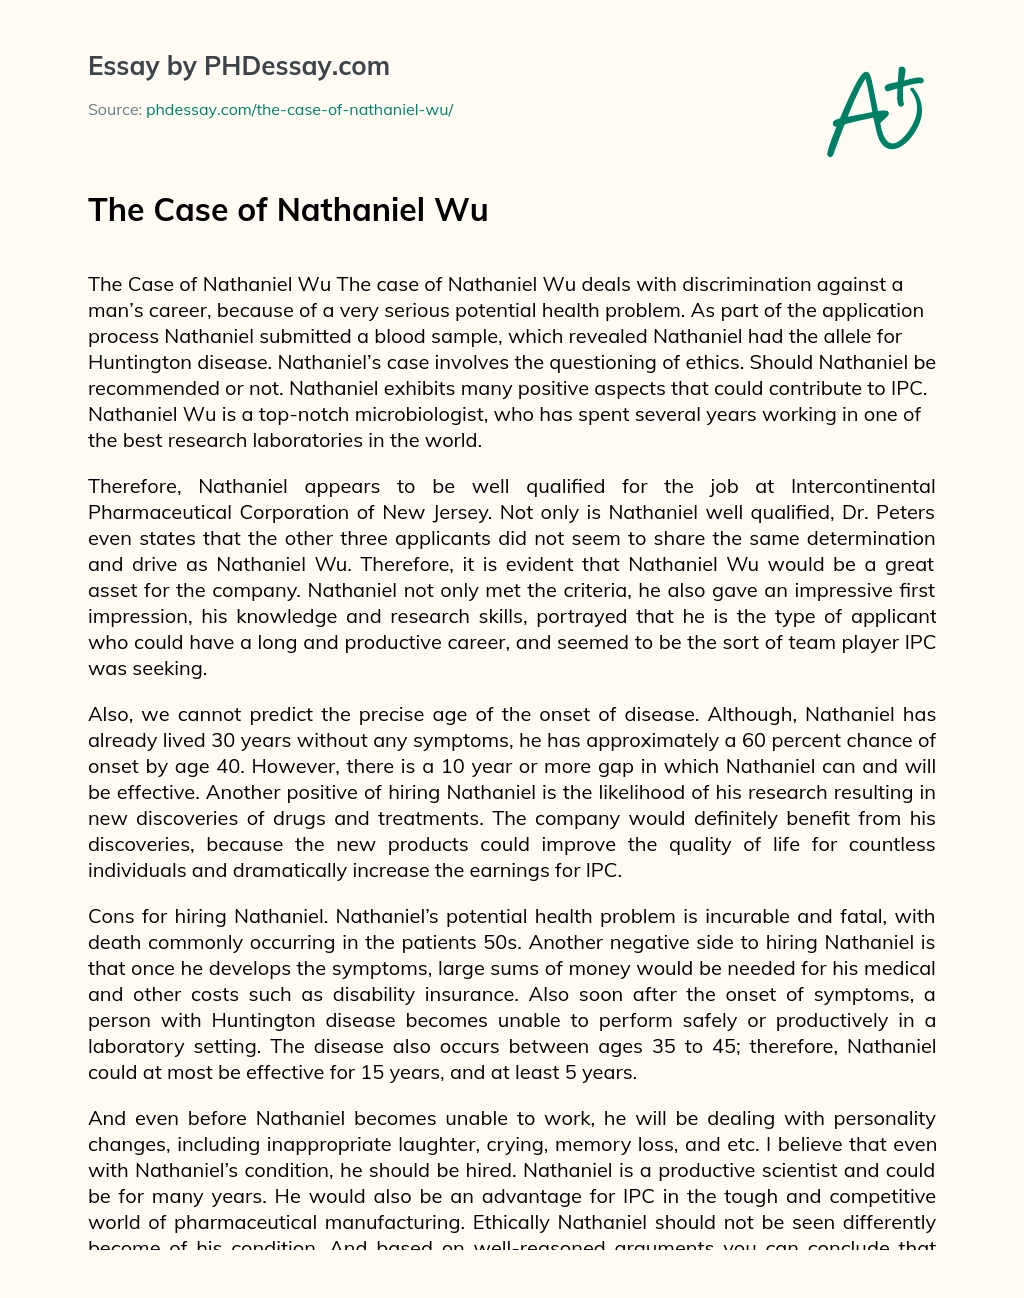 The Case of Nathaniel Wu essay